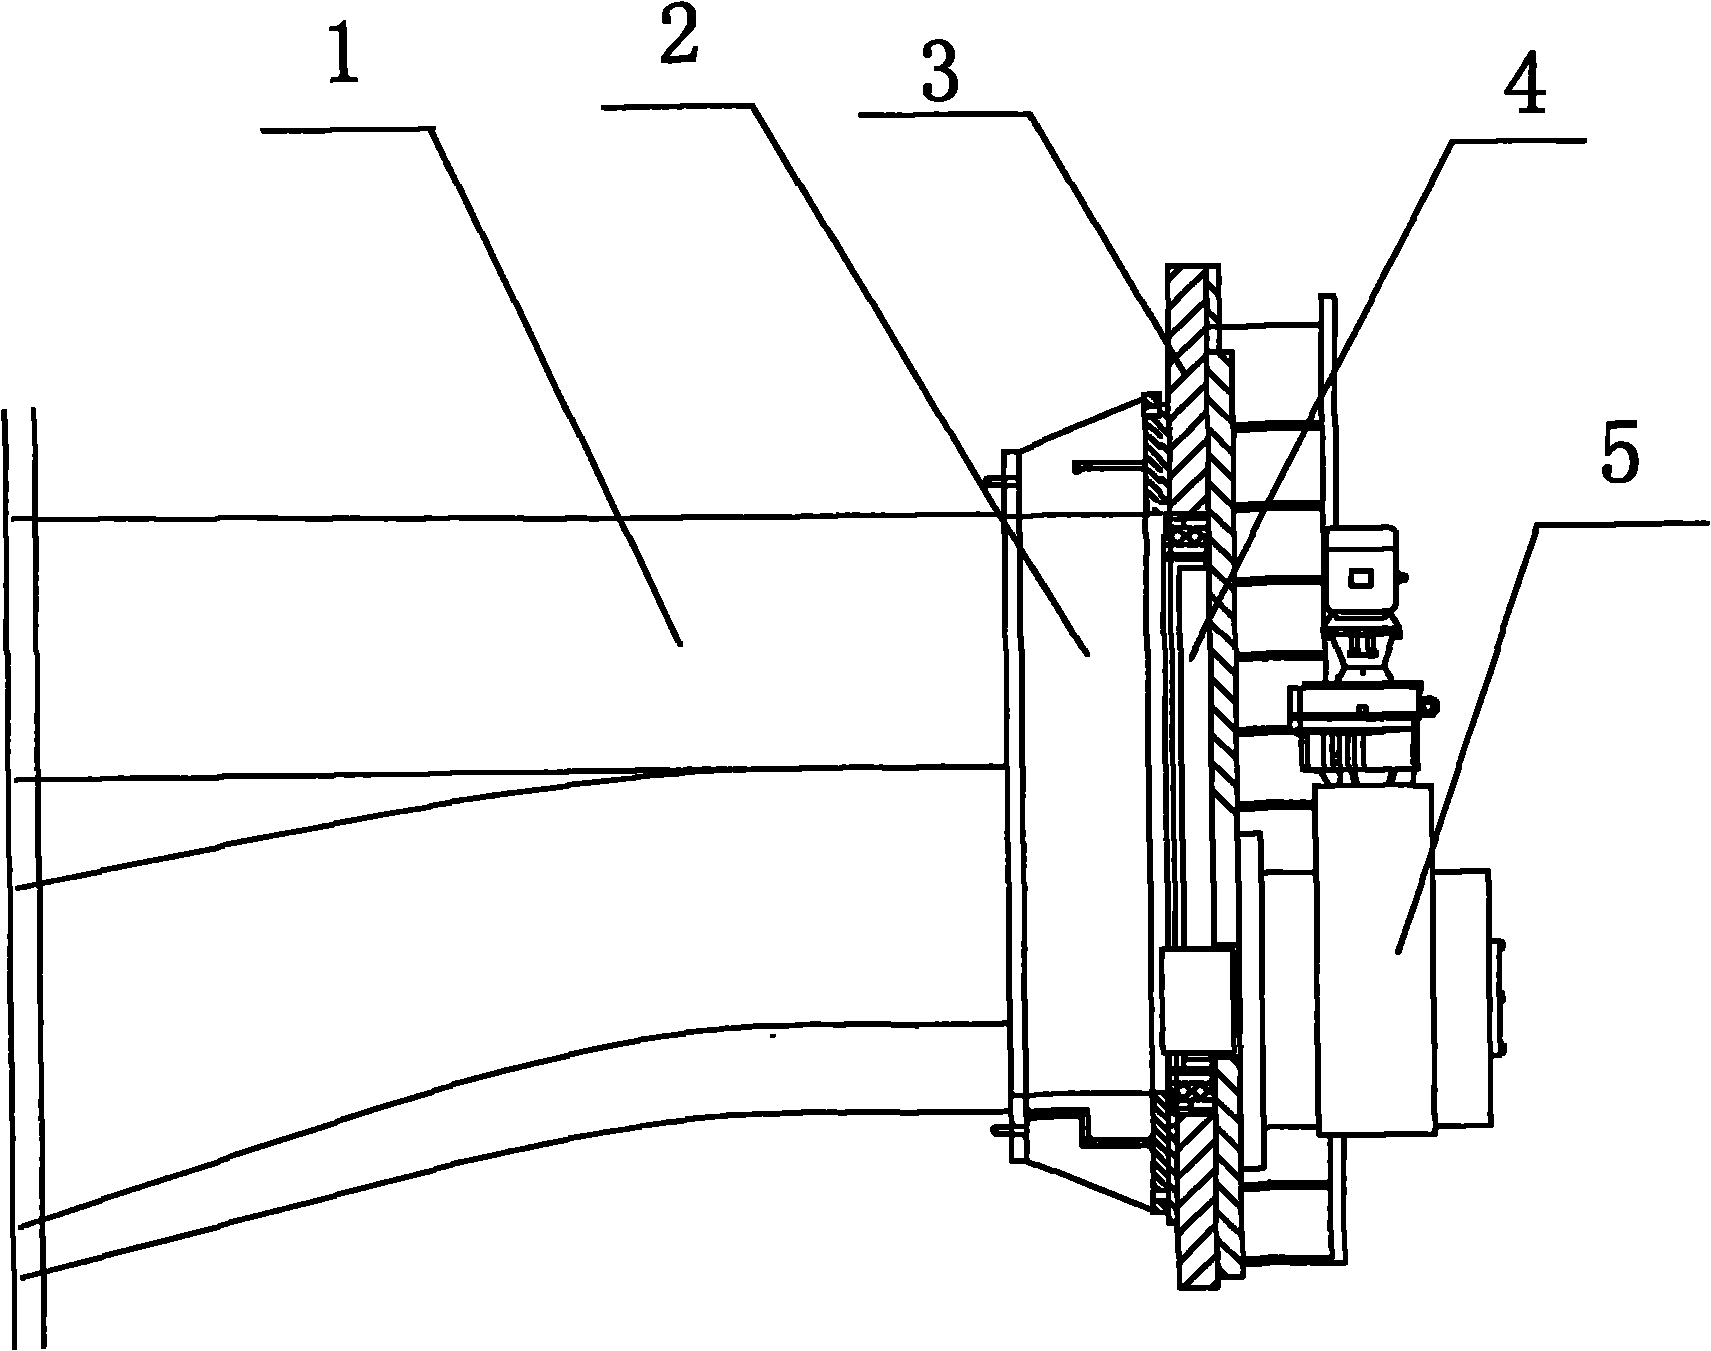 Blade rotating device for comprehensive performance test of fan blades